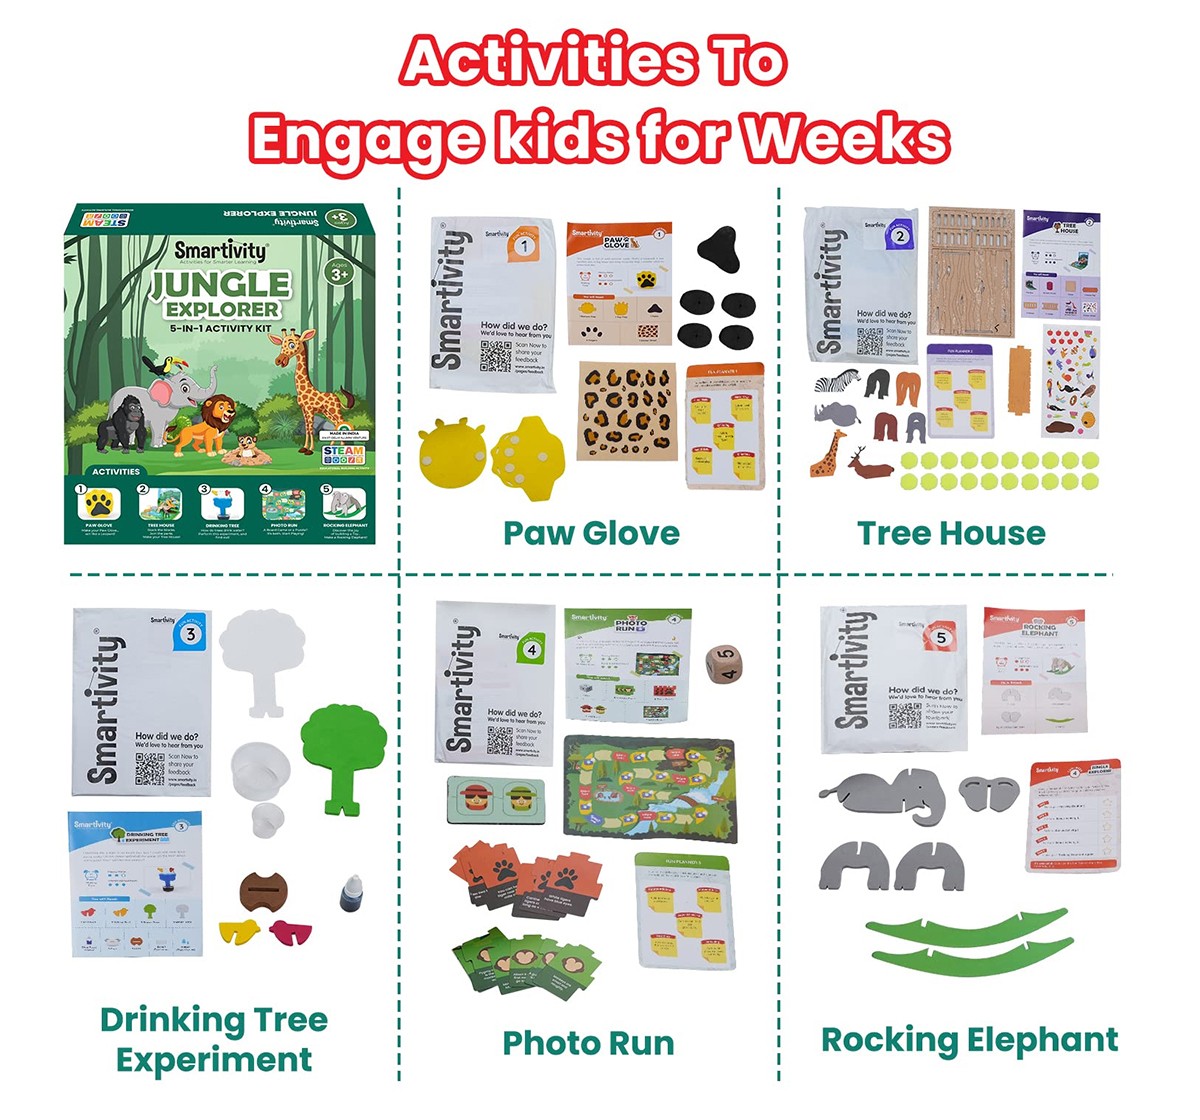 Smartivity Jungle Explorer Activity Kit for 3 to 5 Years Kids